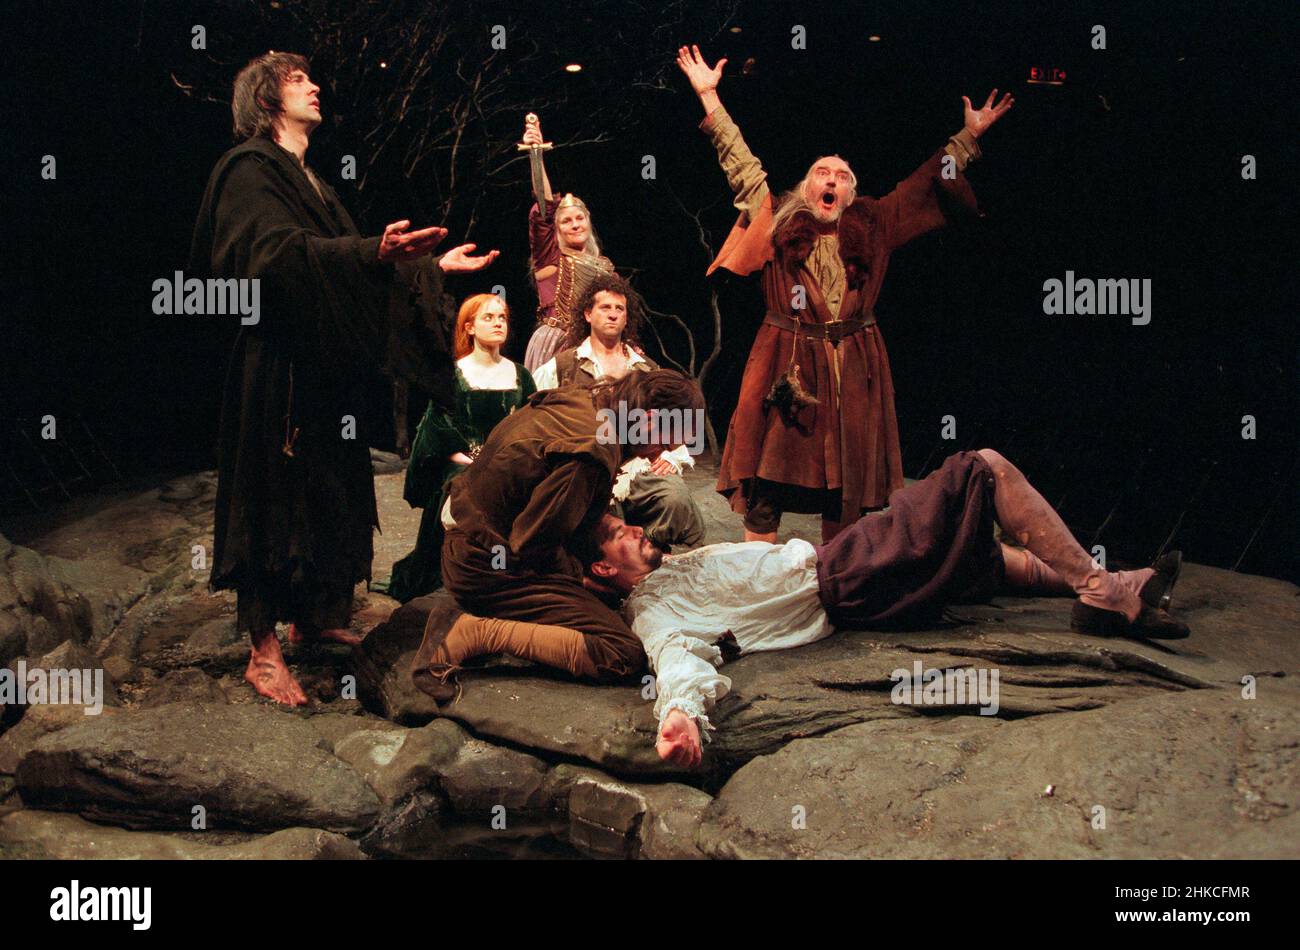 rear: Frances Tomelty (Maeve)  right: Gawn Grainger (King Sweney)  lying on ground: Patrick Malahide (Edmund) in MUTABILITIE by Frank McGuinness at the Cottesloe Theatre, National Theatre (NT), London SE1  20/11/1997  design: Monica Frawley  lighting: Andrew Bridge  movement: Jane Gibson  director: Trevor Nunn Stock Photo